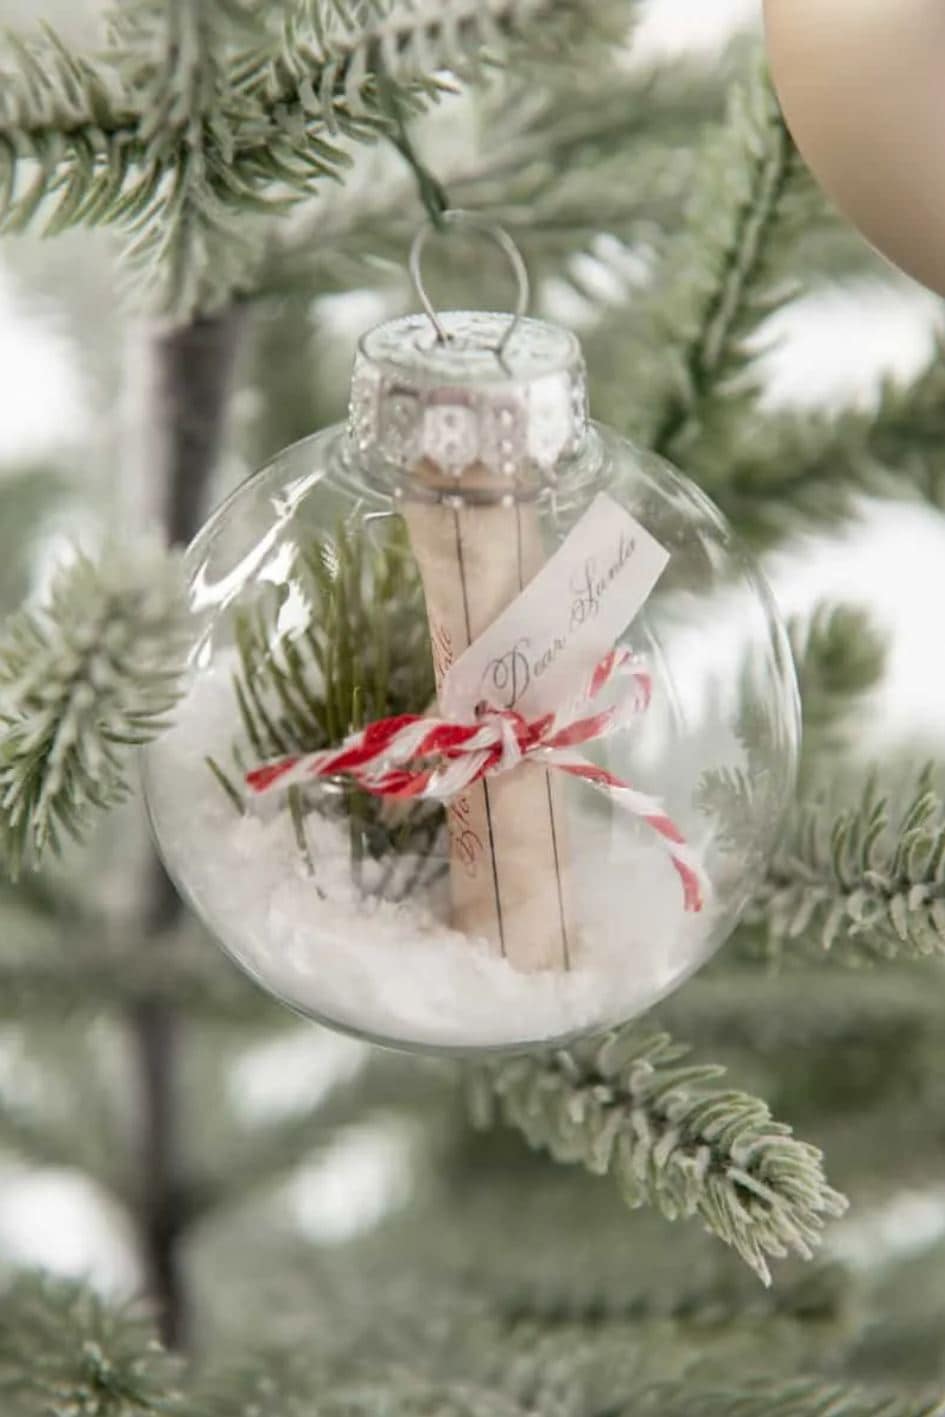 A "Letter to Santa" enclosed in a clear ornament.